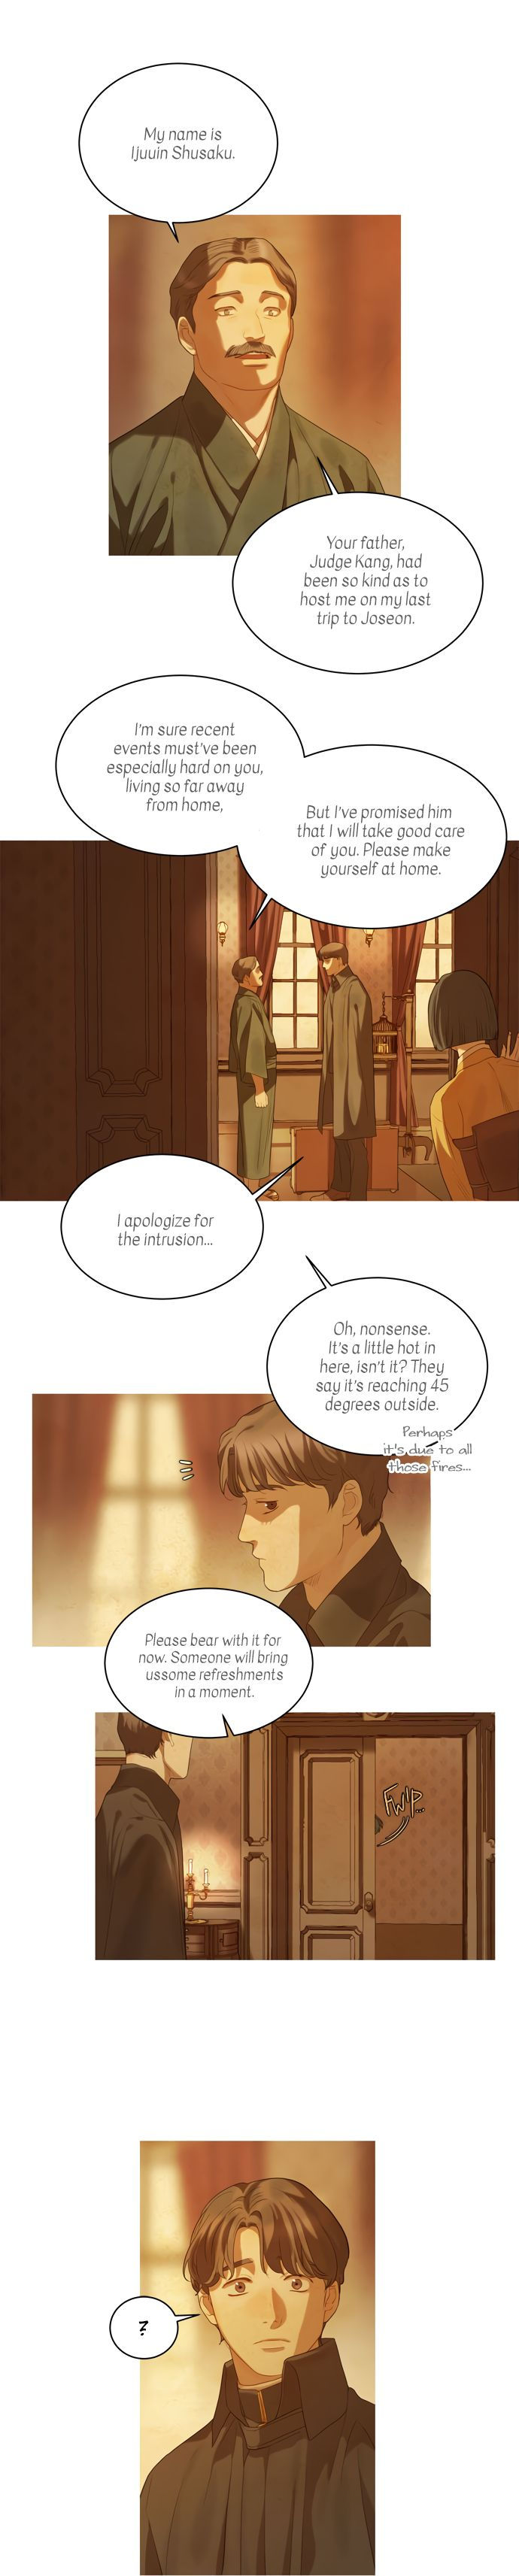 Gorae Byul - The Gyeongseong Mermaid - Chapter 22 Page 18